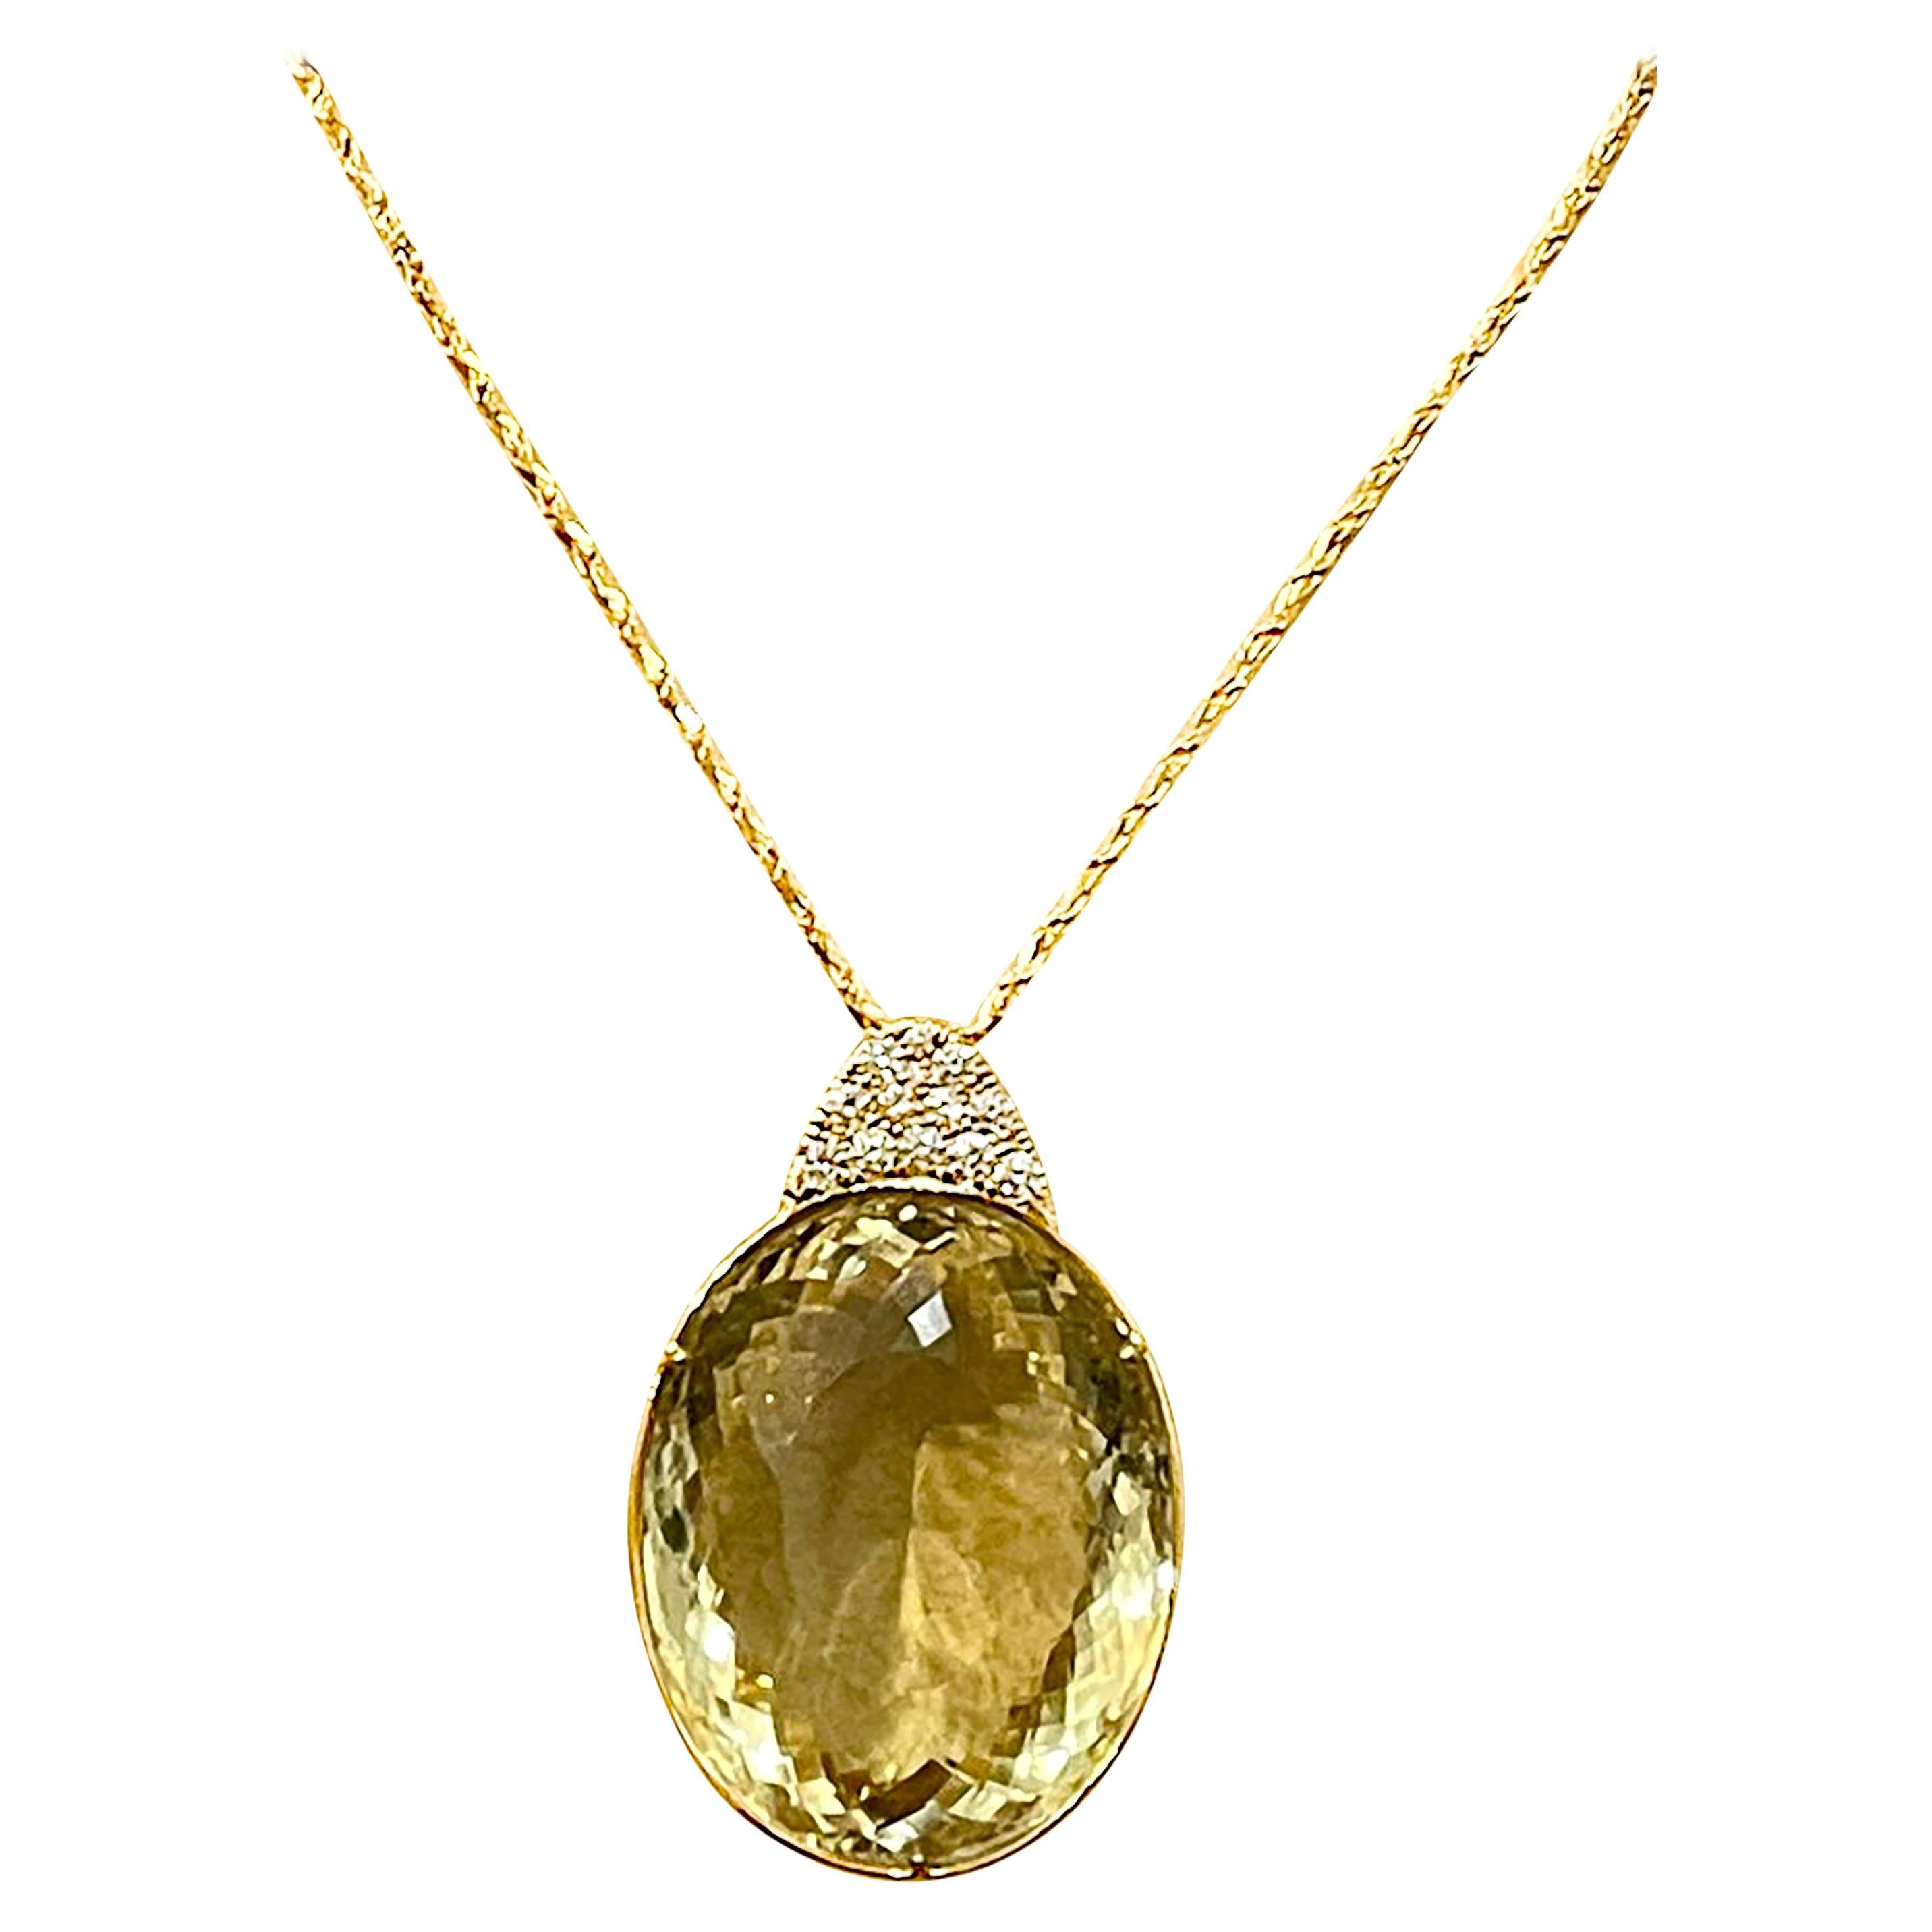 125 Carat Citrine & Diamond Pendent or Necklace 14 Karat Yellow Gold with Chain For Sale